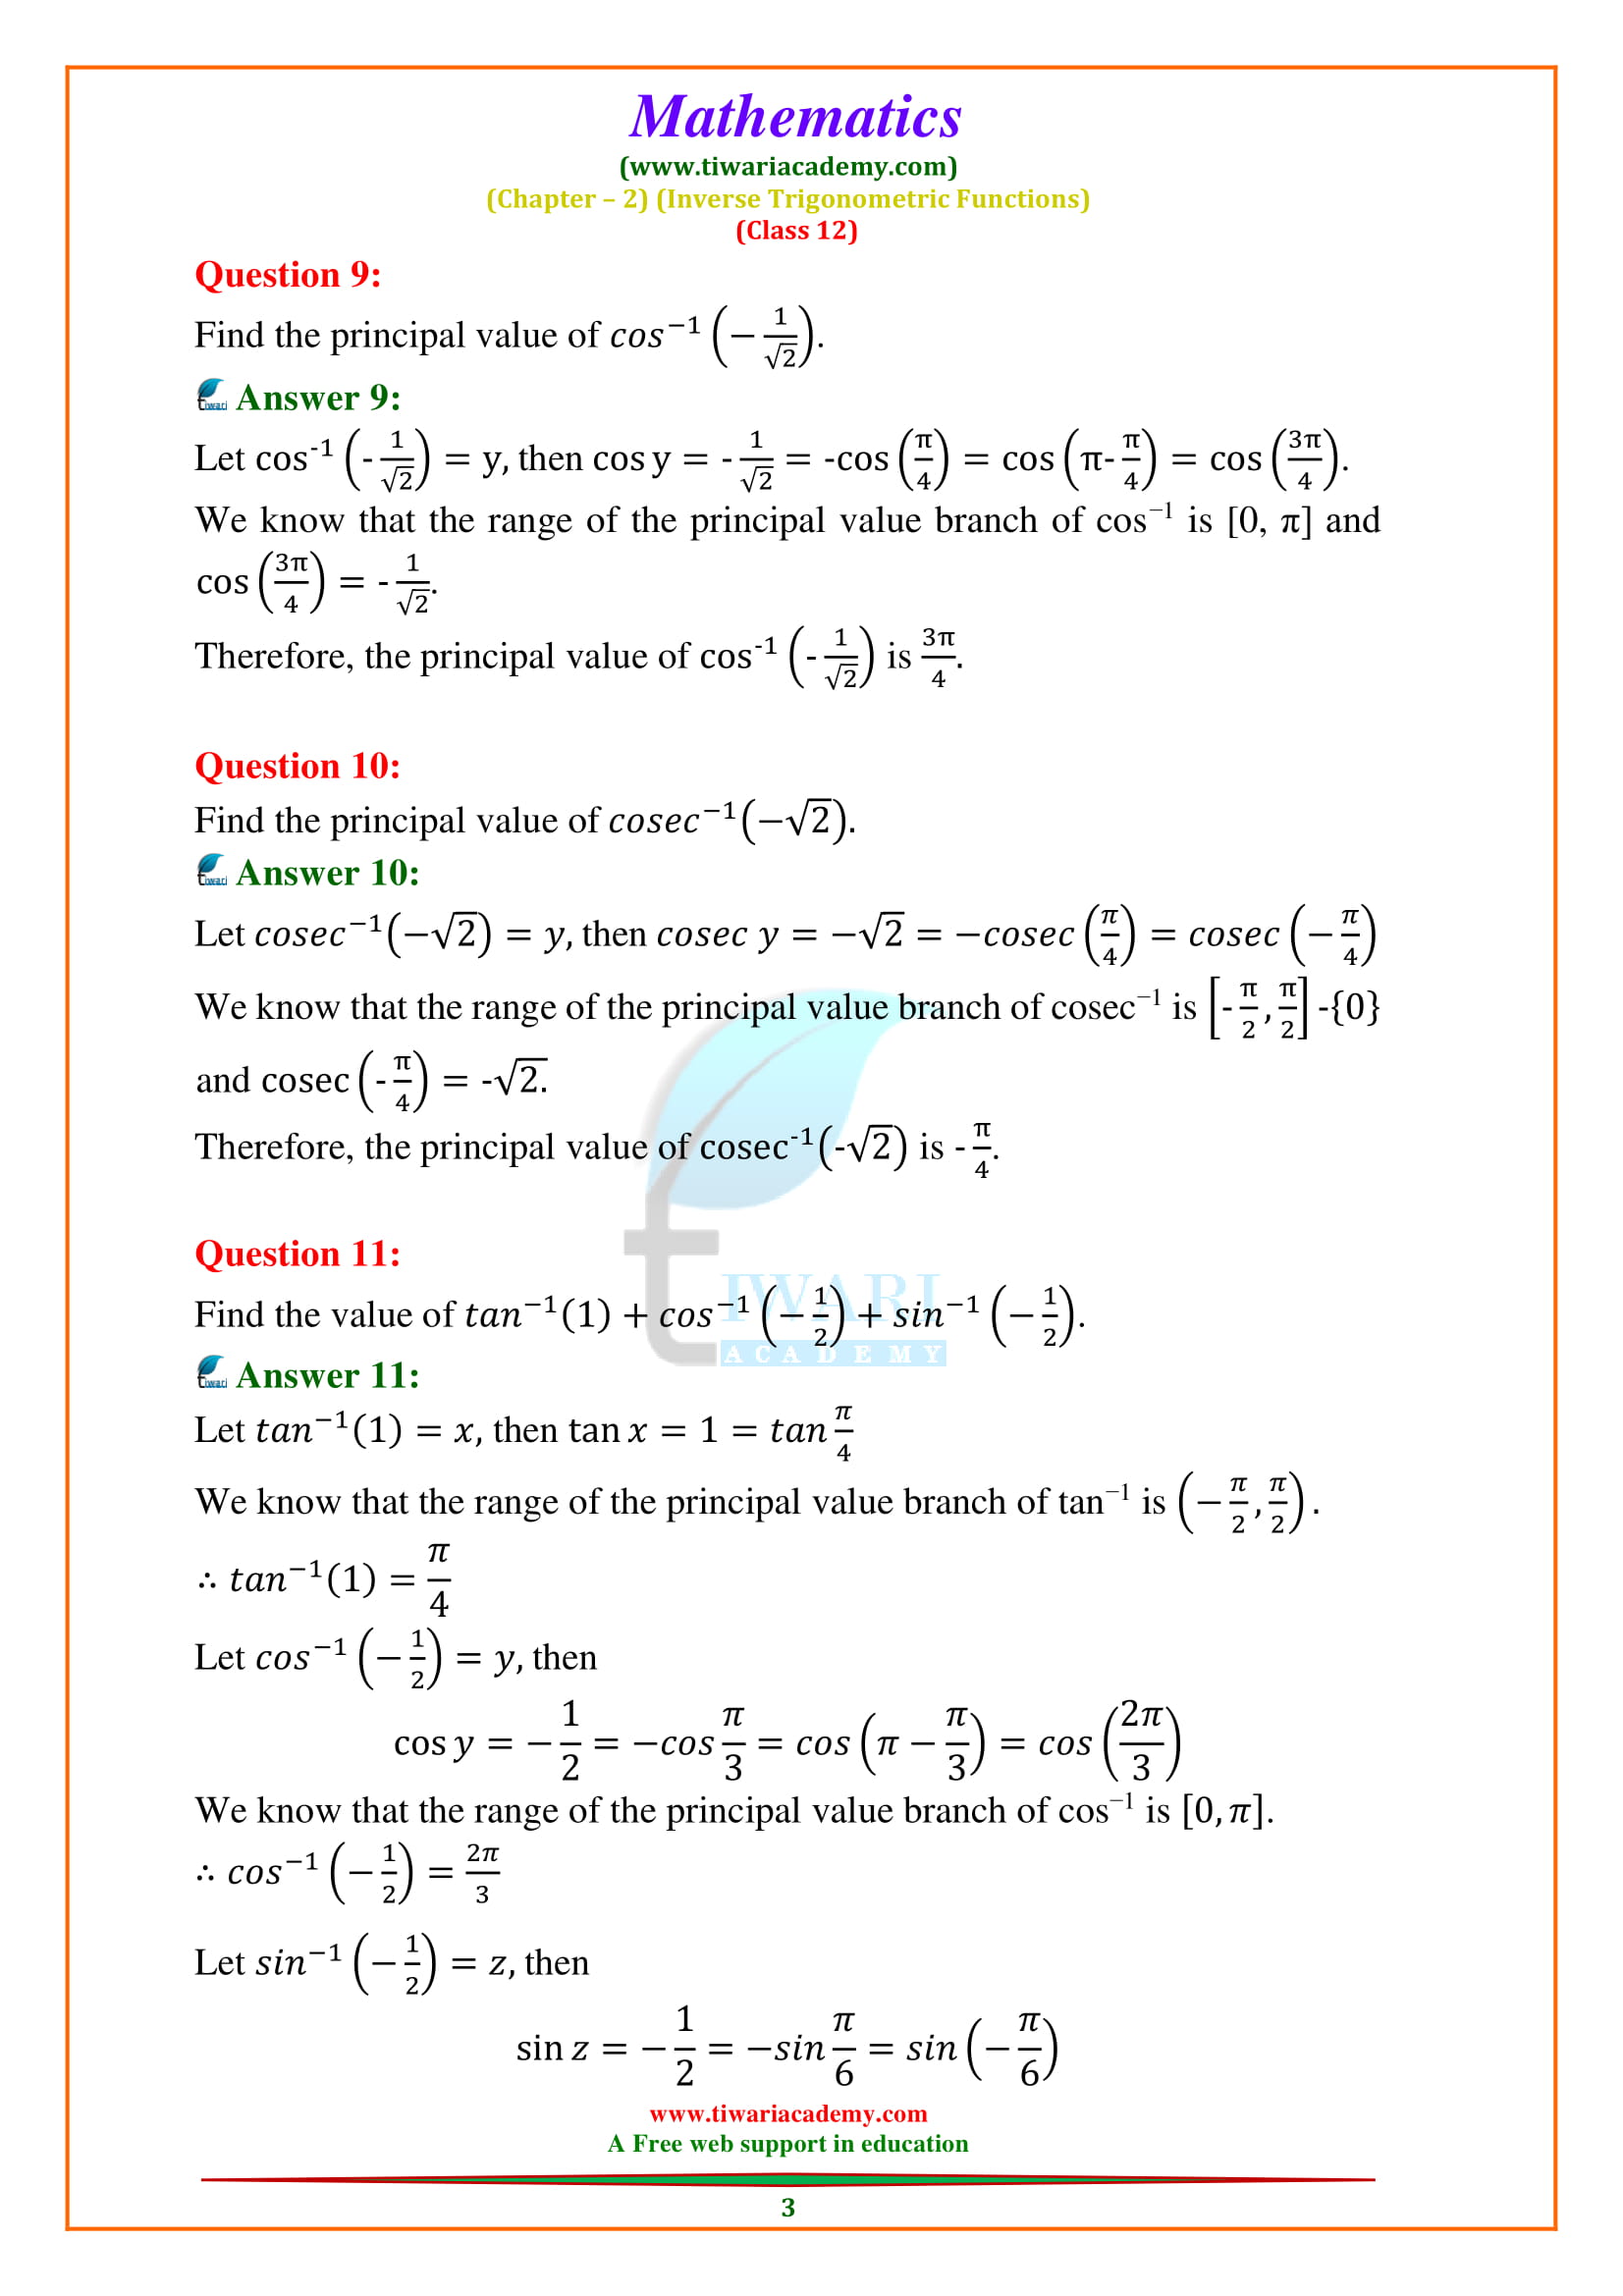 12 Maths Chapter 2 Exercise 2.1 Solutions